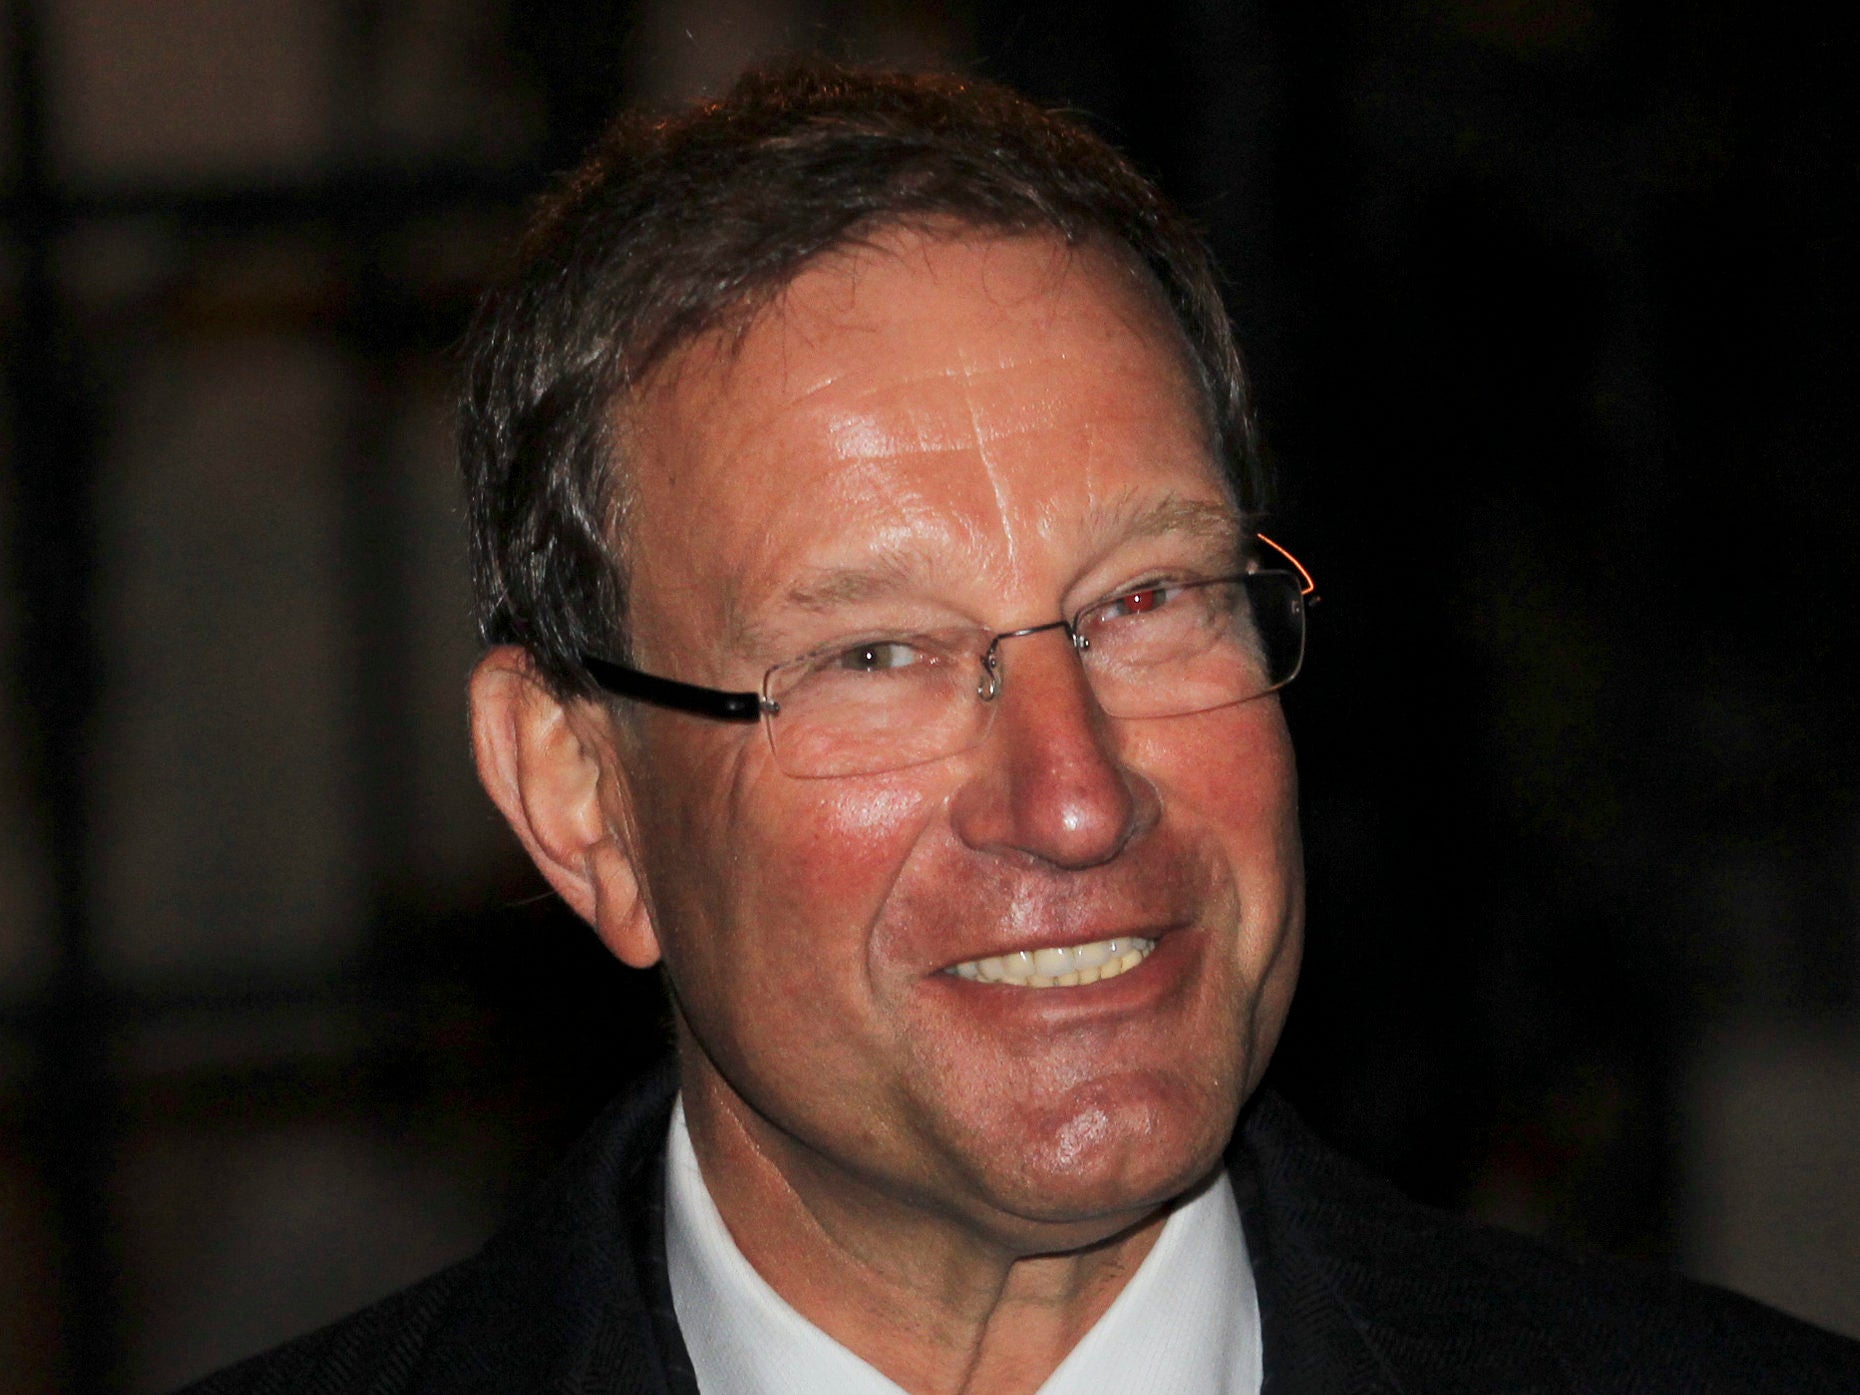 Richard Desmond leaves UK media market after 47 years with sale of Reach shares